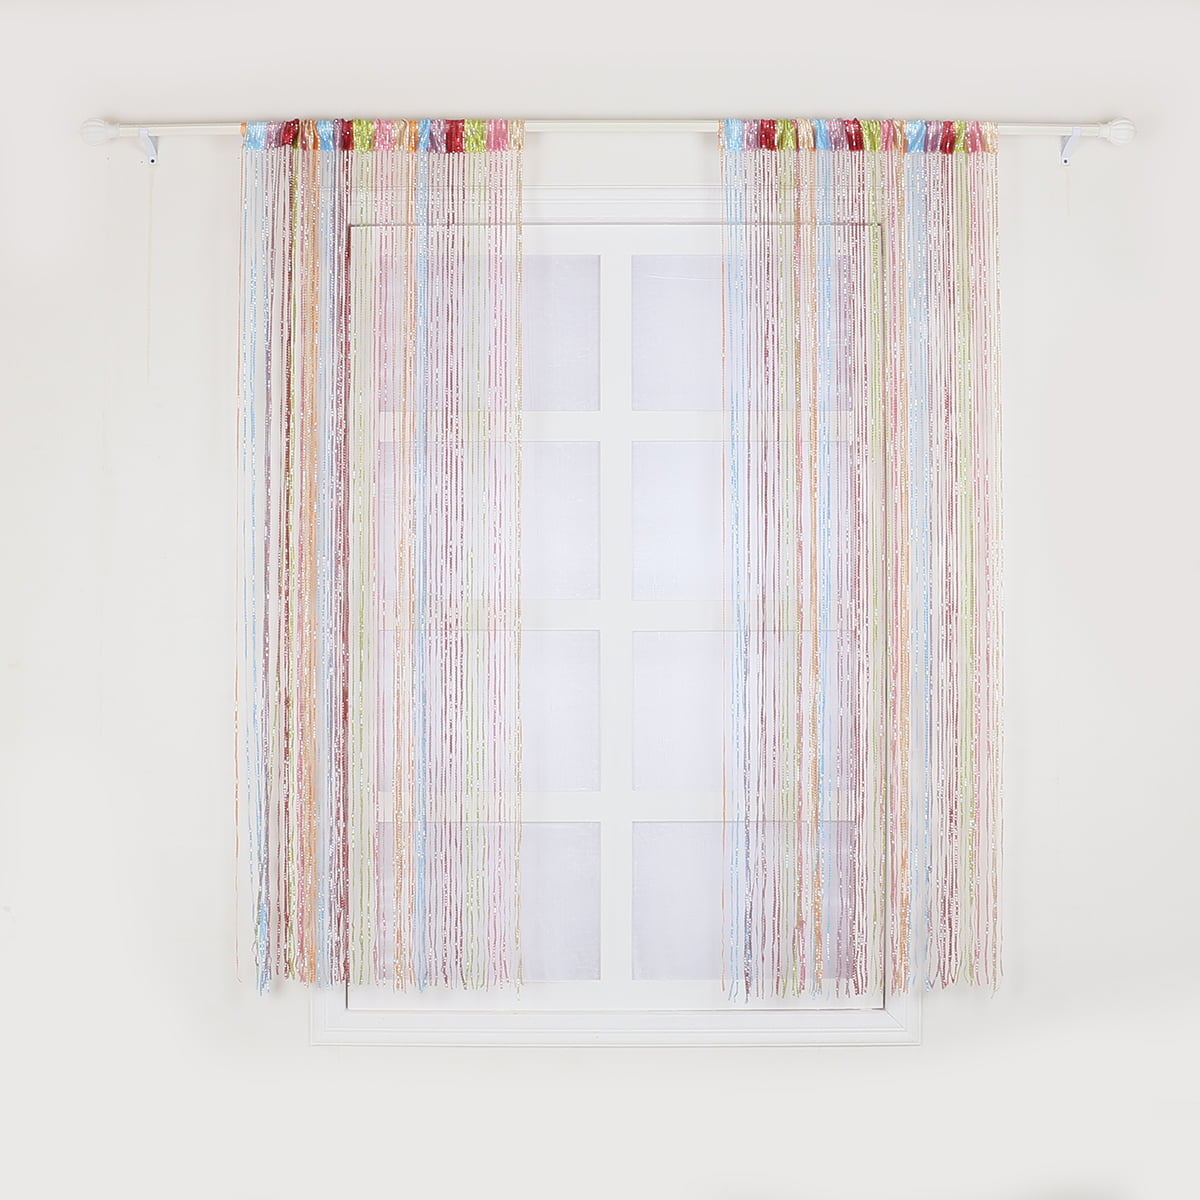 Details about   Panel Beaded Curtain Window String Tassel Flash Silver Line String Curtain 1x2M 